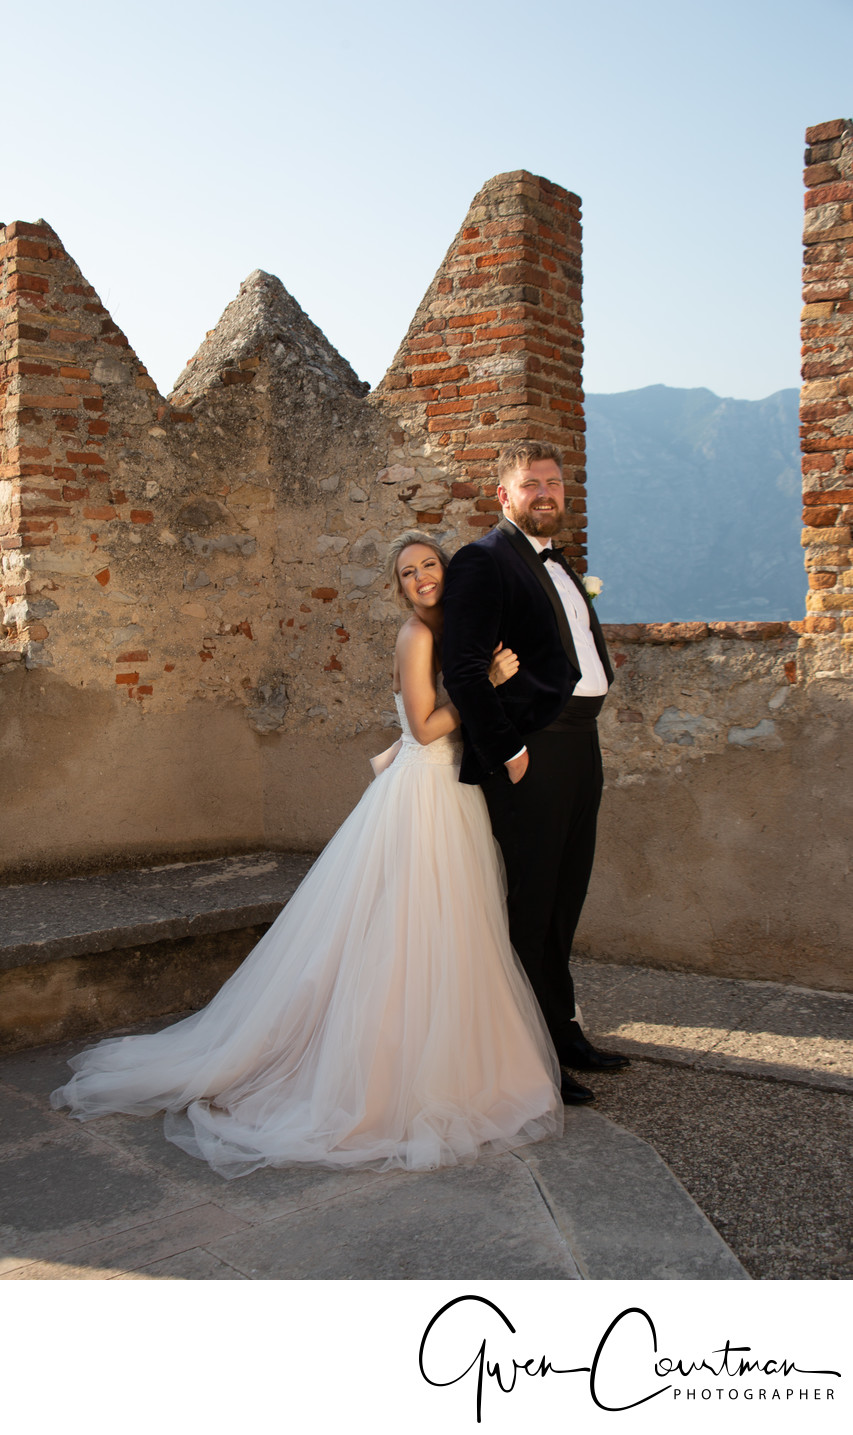 Fabulous wedding venues in Italy.